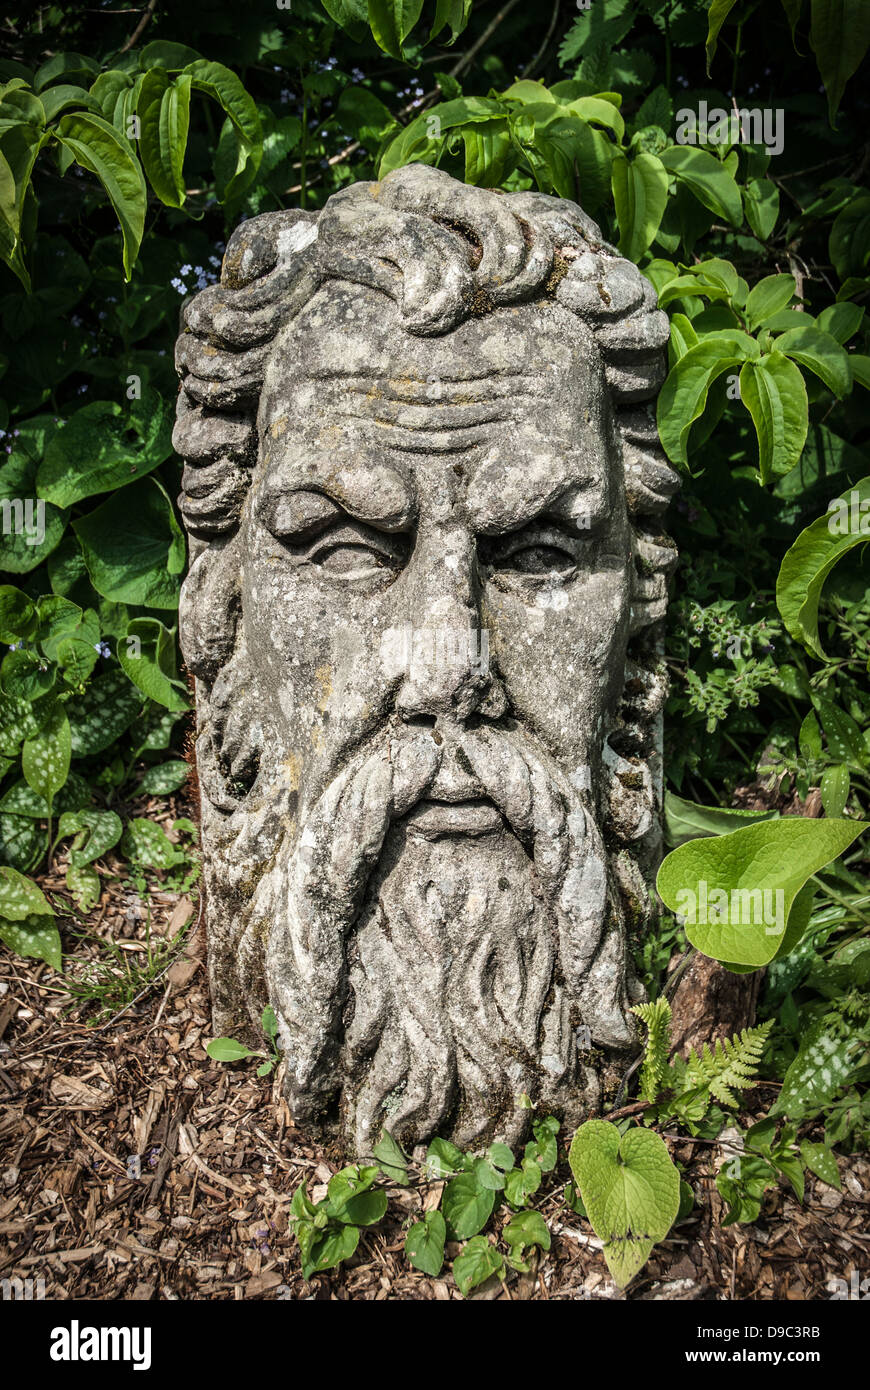 A stone sculpted head of a bearded man in garden. Stock Photo